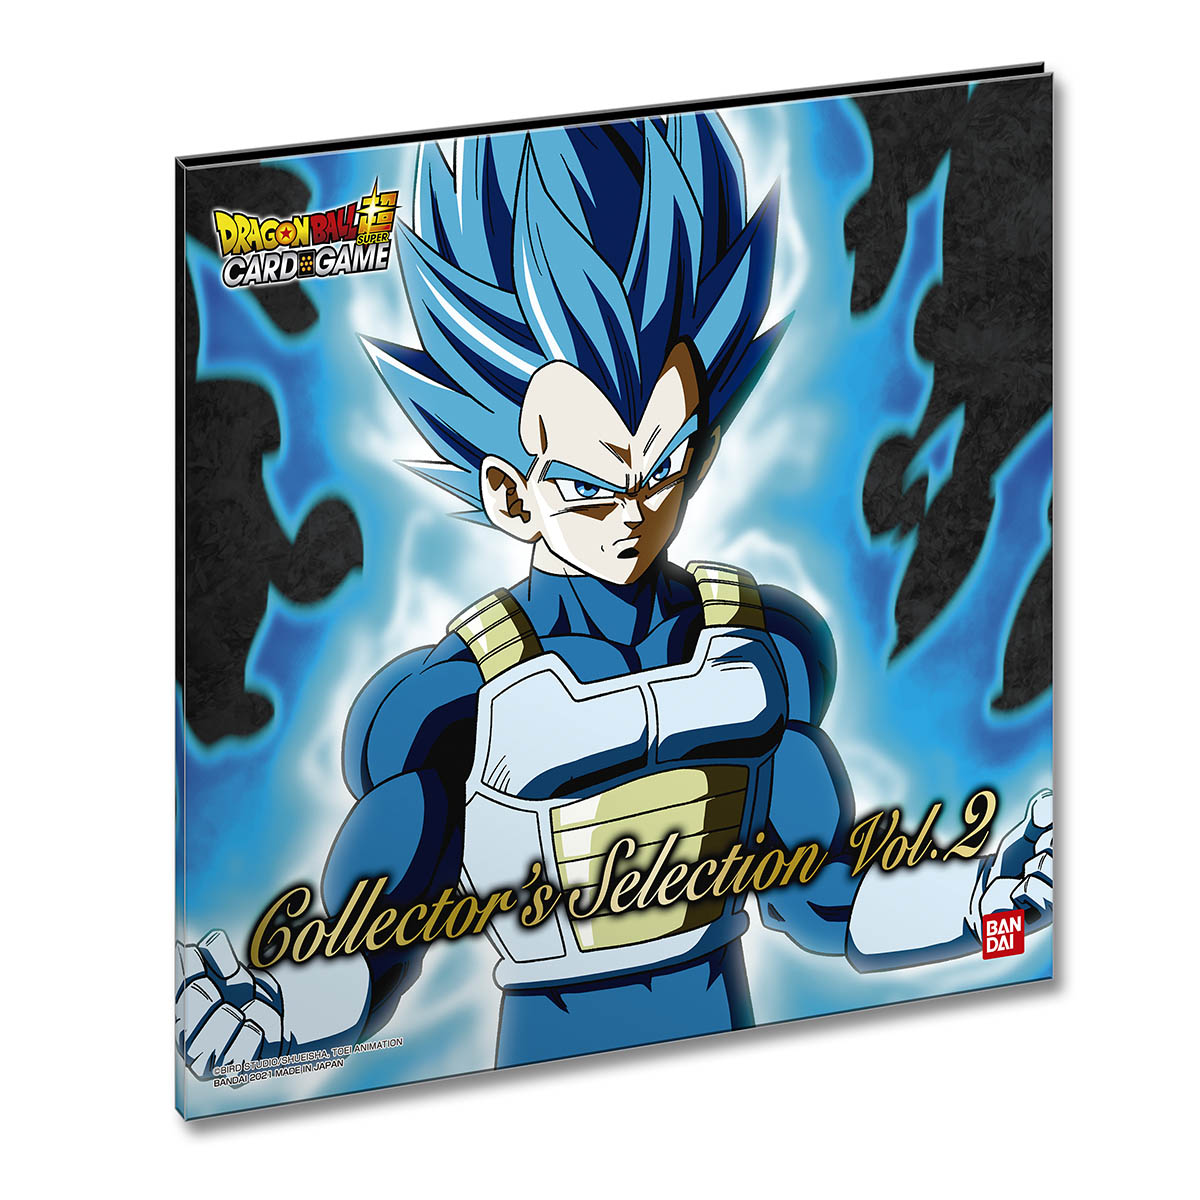 Dragon Ball Super Card Game Collector S Selection Vol 2 Dragon Ball Premium Bandai Usa Online Store For Action Figures Model Kits Toys And More